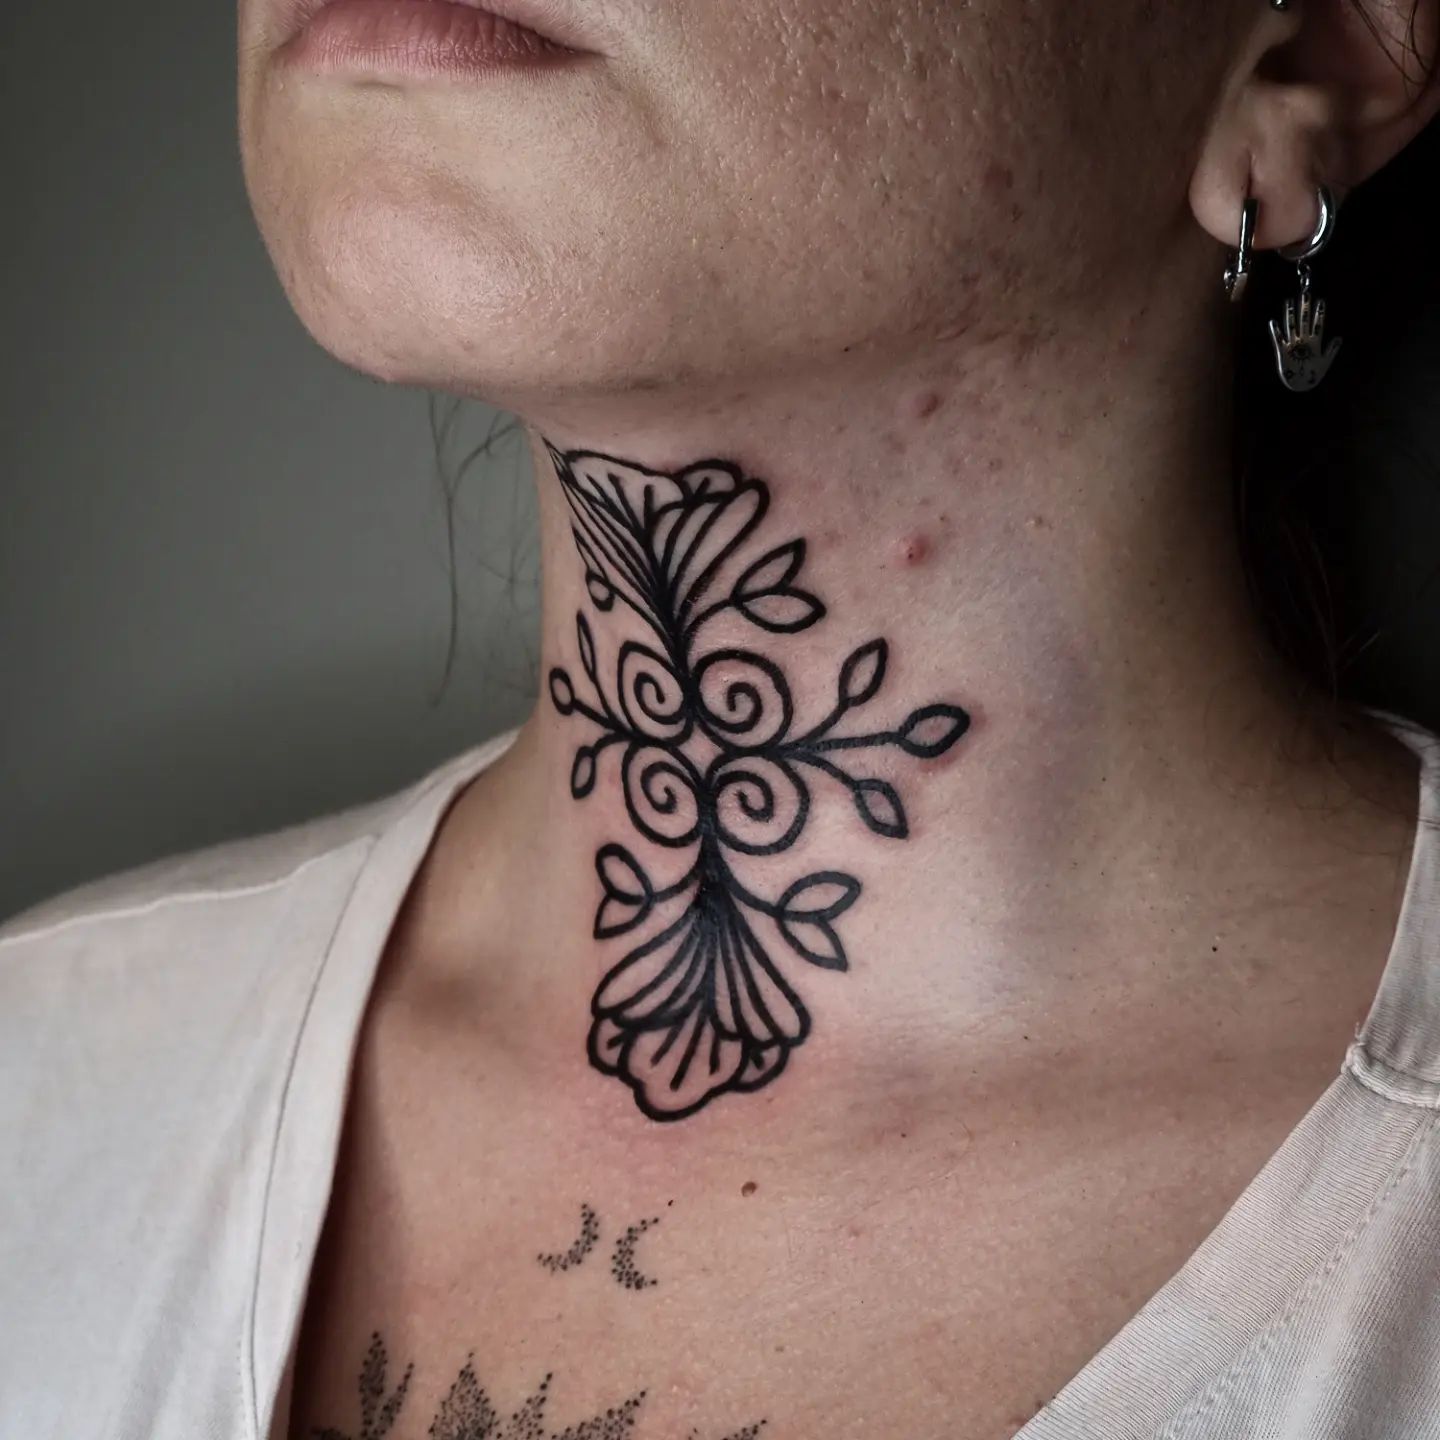 This geometric piece looks very stylish and ideal in terms of size. Flower and leaf details show the perfection of nature in a harmony. Also, if you like black tattoos more than colorful ones you can give a chance to this nice looking tattoo.